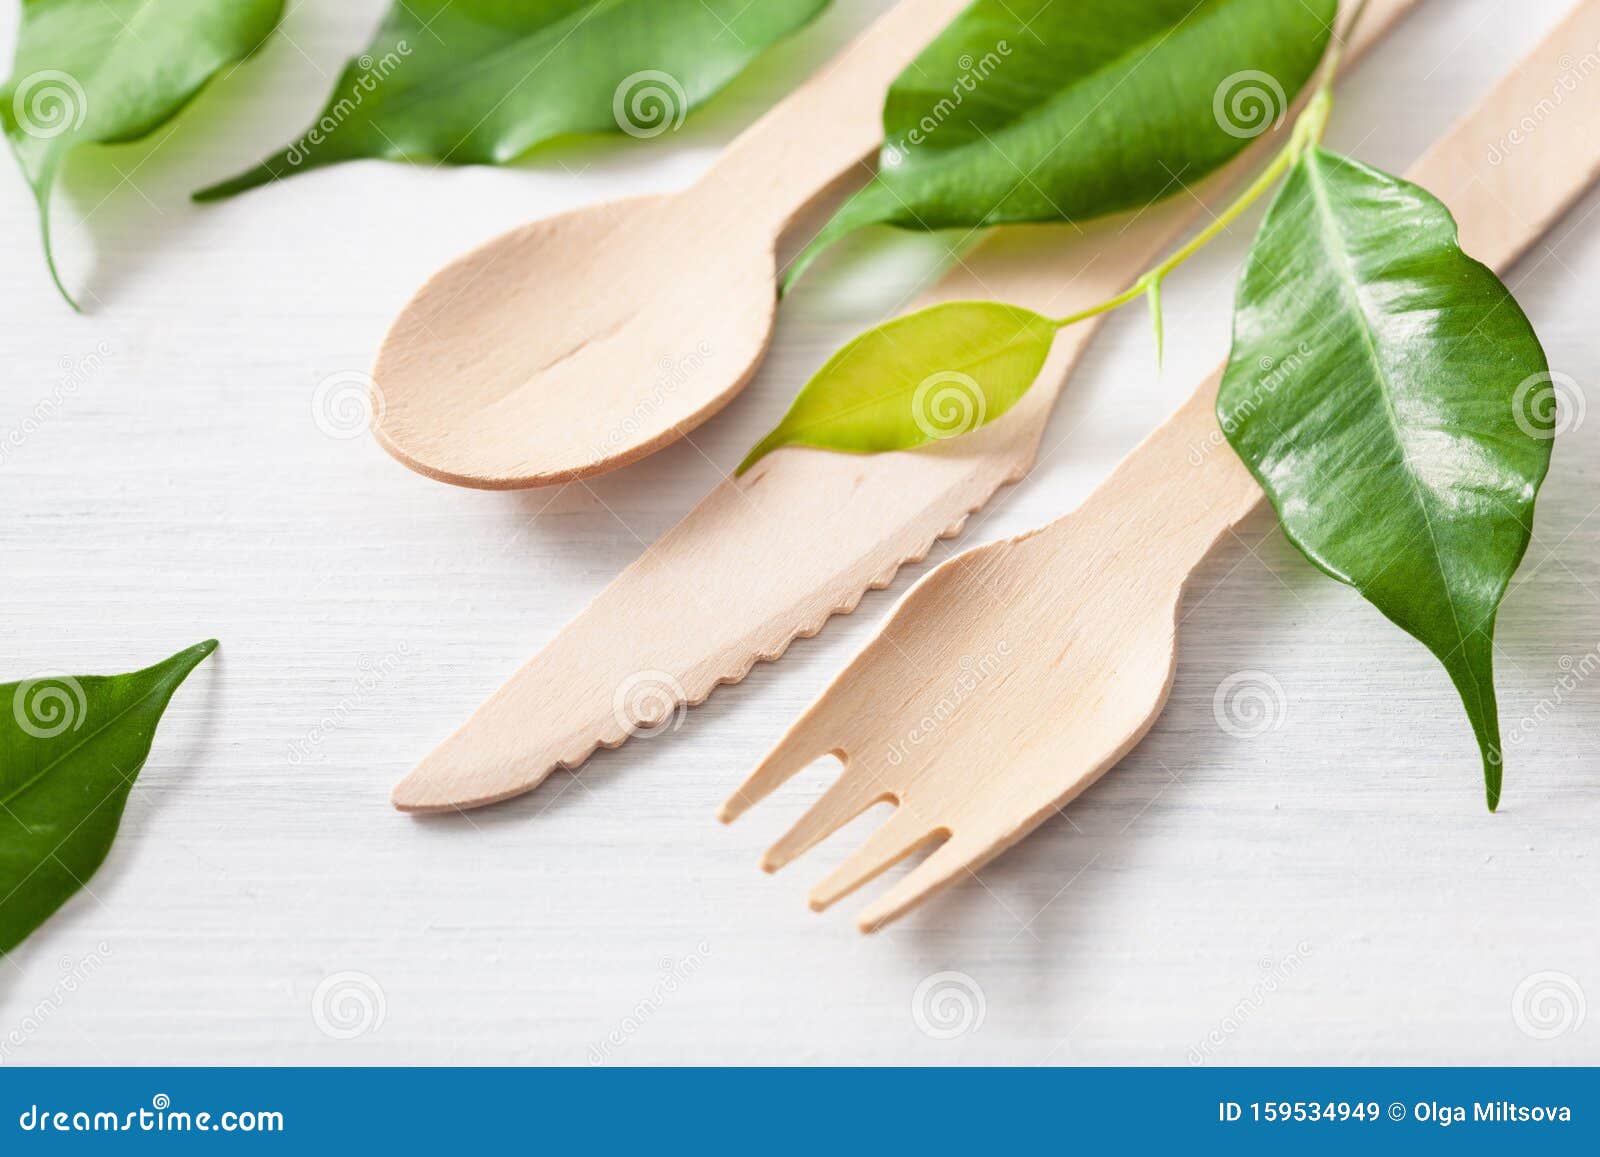 eco friendly wooden cutlery. plastic free concept